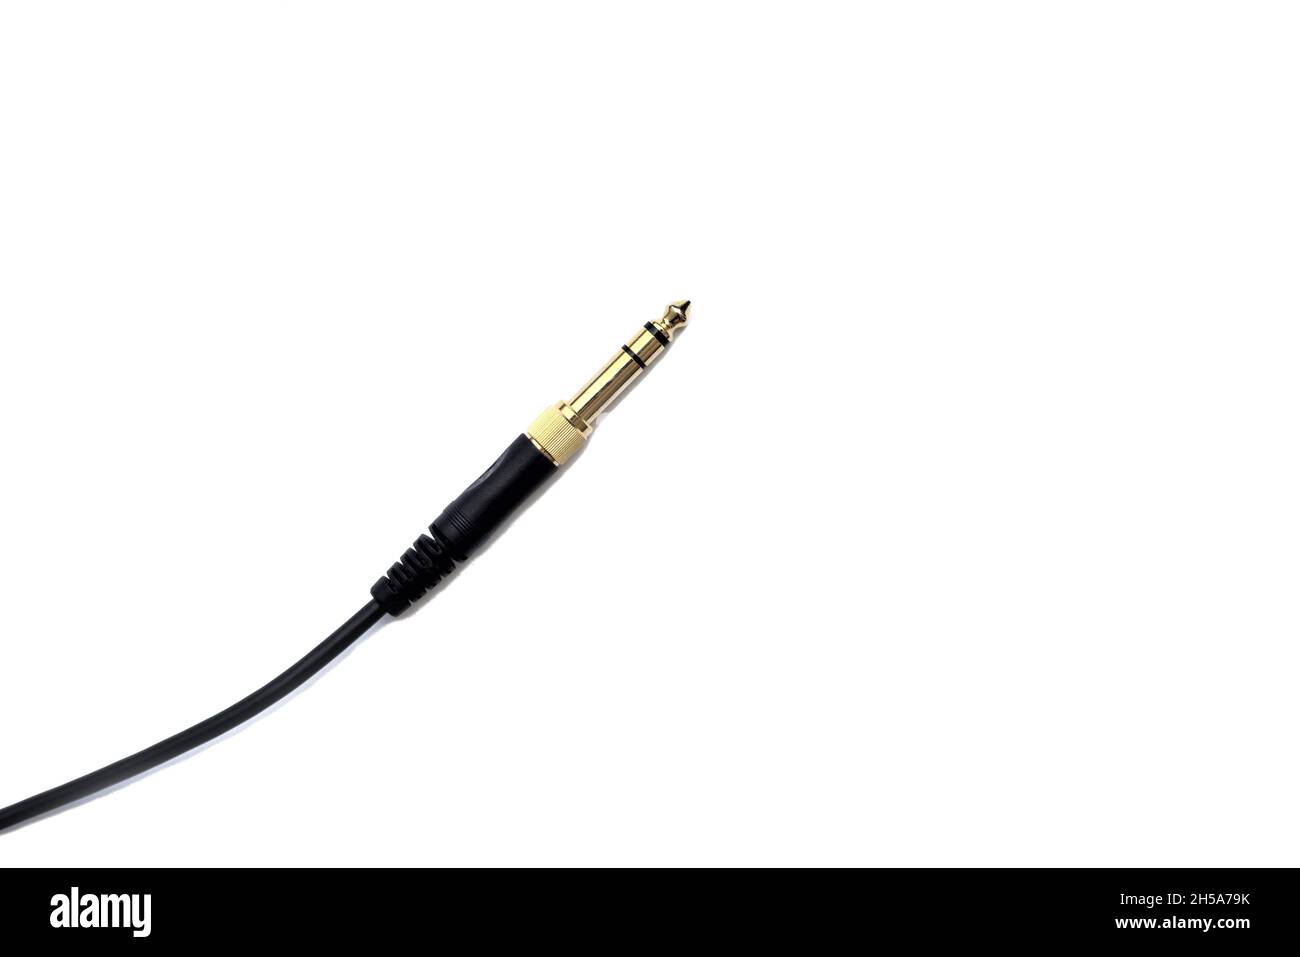 Stereo audio headphone jack with cable on white background. Gold jack plug for connecting audio devices and musical instruments. Stock Photo